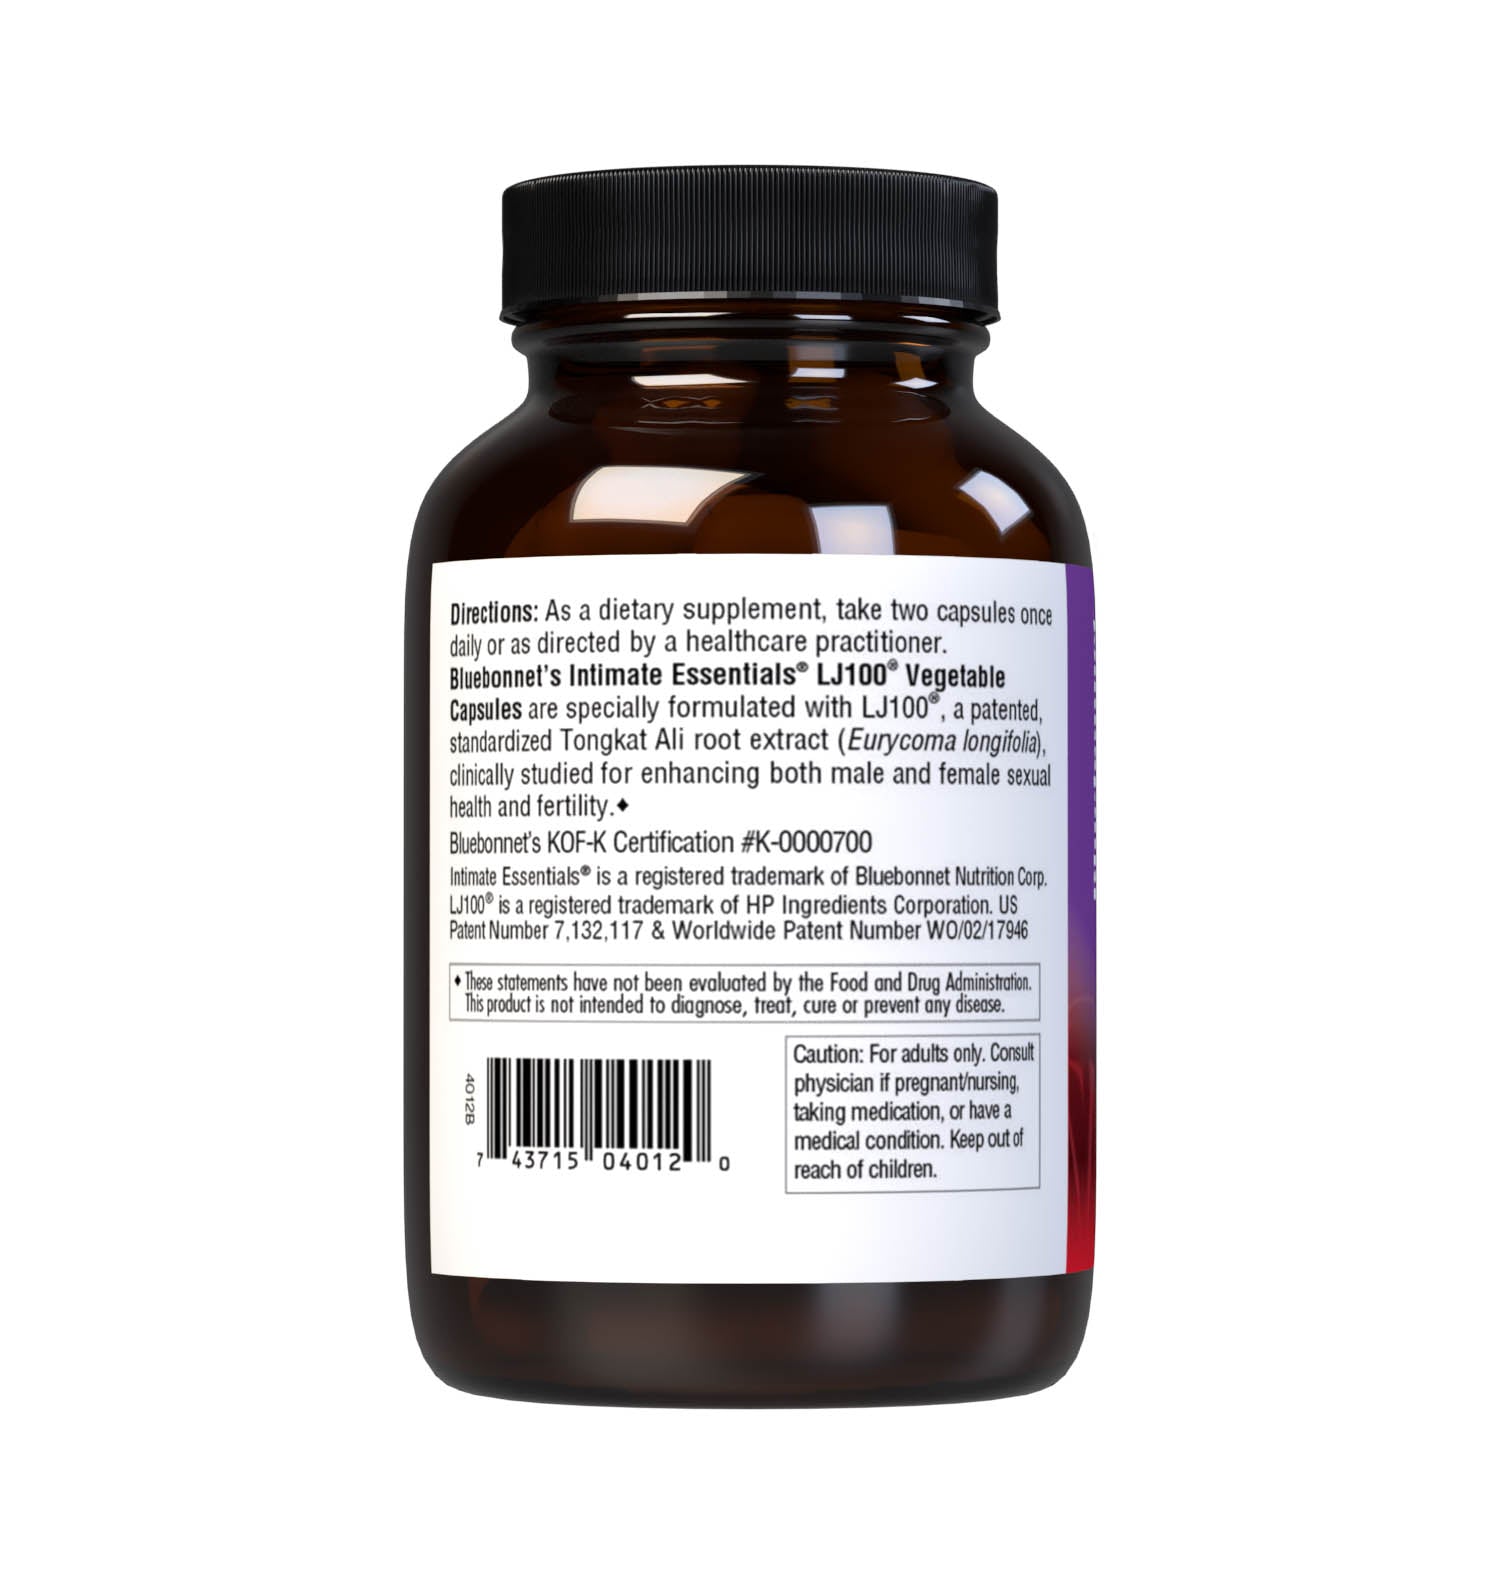 Bluebonnet’s Intimate Essentials LJ100 Vegetable Capsules are specially formulated with LJ100, a patented, standardized Tongkat Ali root extract (Eurycoma longifolia), clinically studied for enhancing both male and female sexual health and fertility.  Description panel. #size_60 count